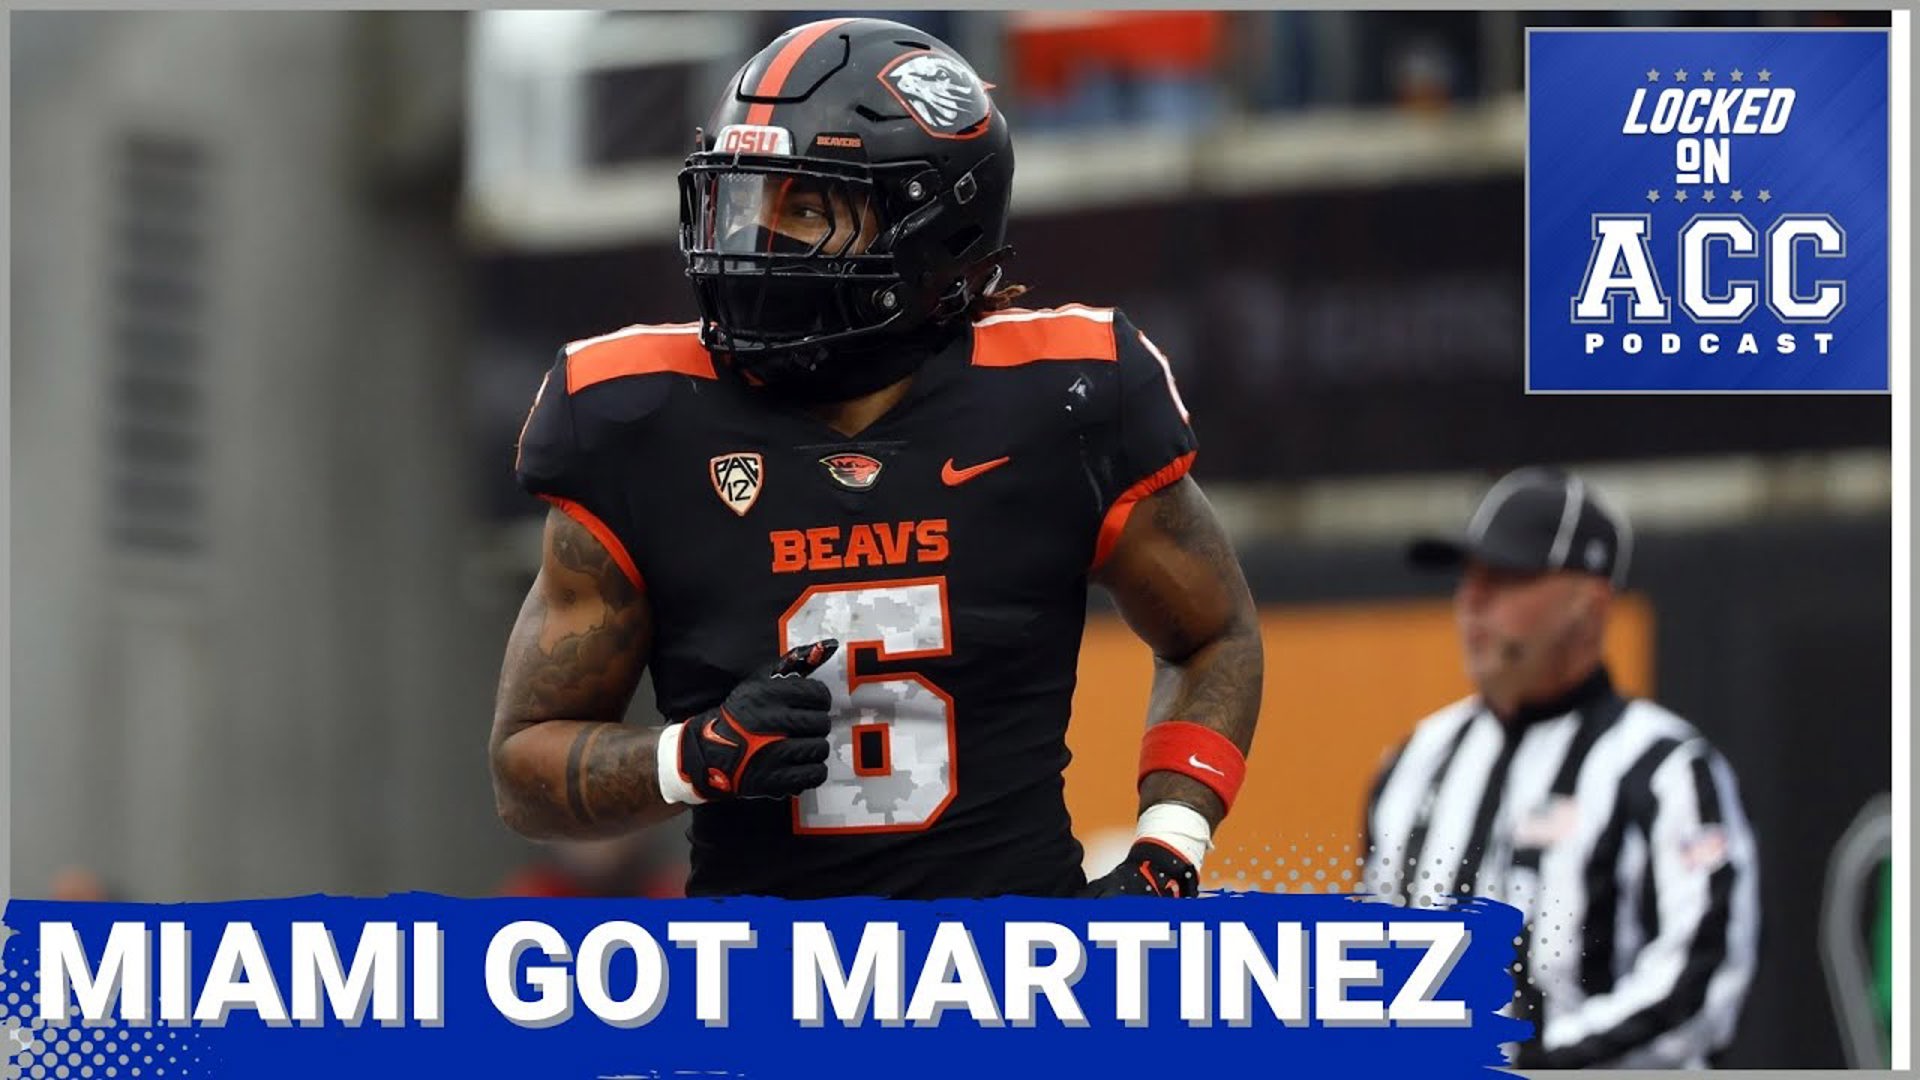 The Miami Hurricanes have secured a commitment from their top Transfer Portal target. First Team All-PAC 12 selection Damien Martinez has chosen Miami